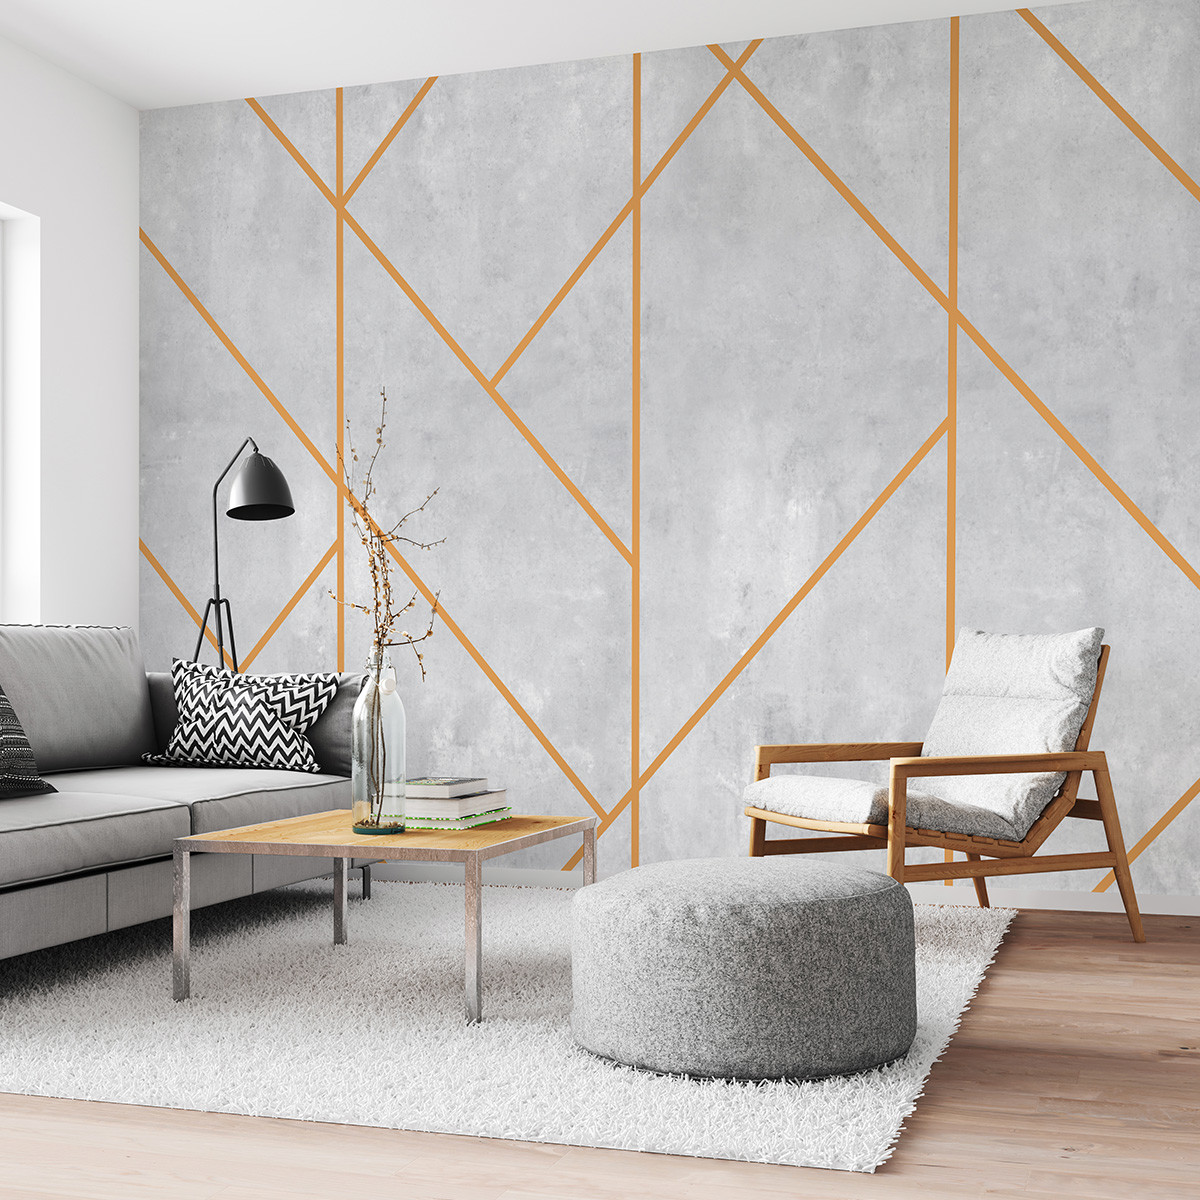 Concrete Stucco with Line Pattern | WALLPAPER - Grafico Group